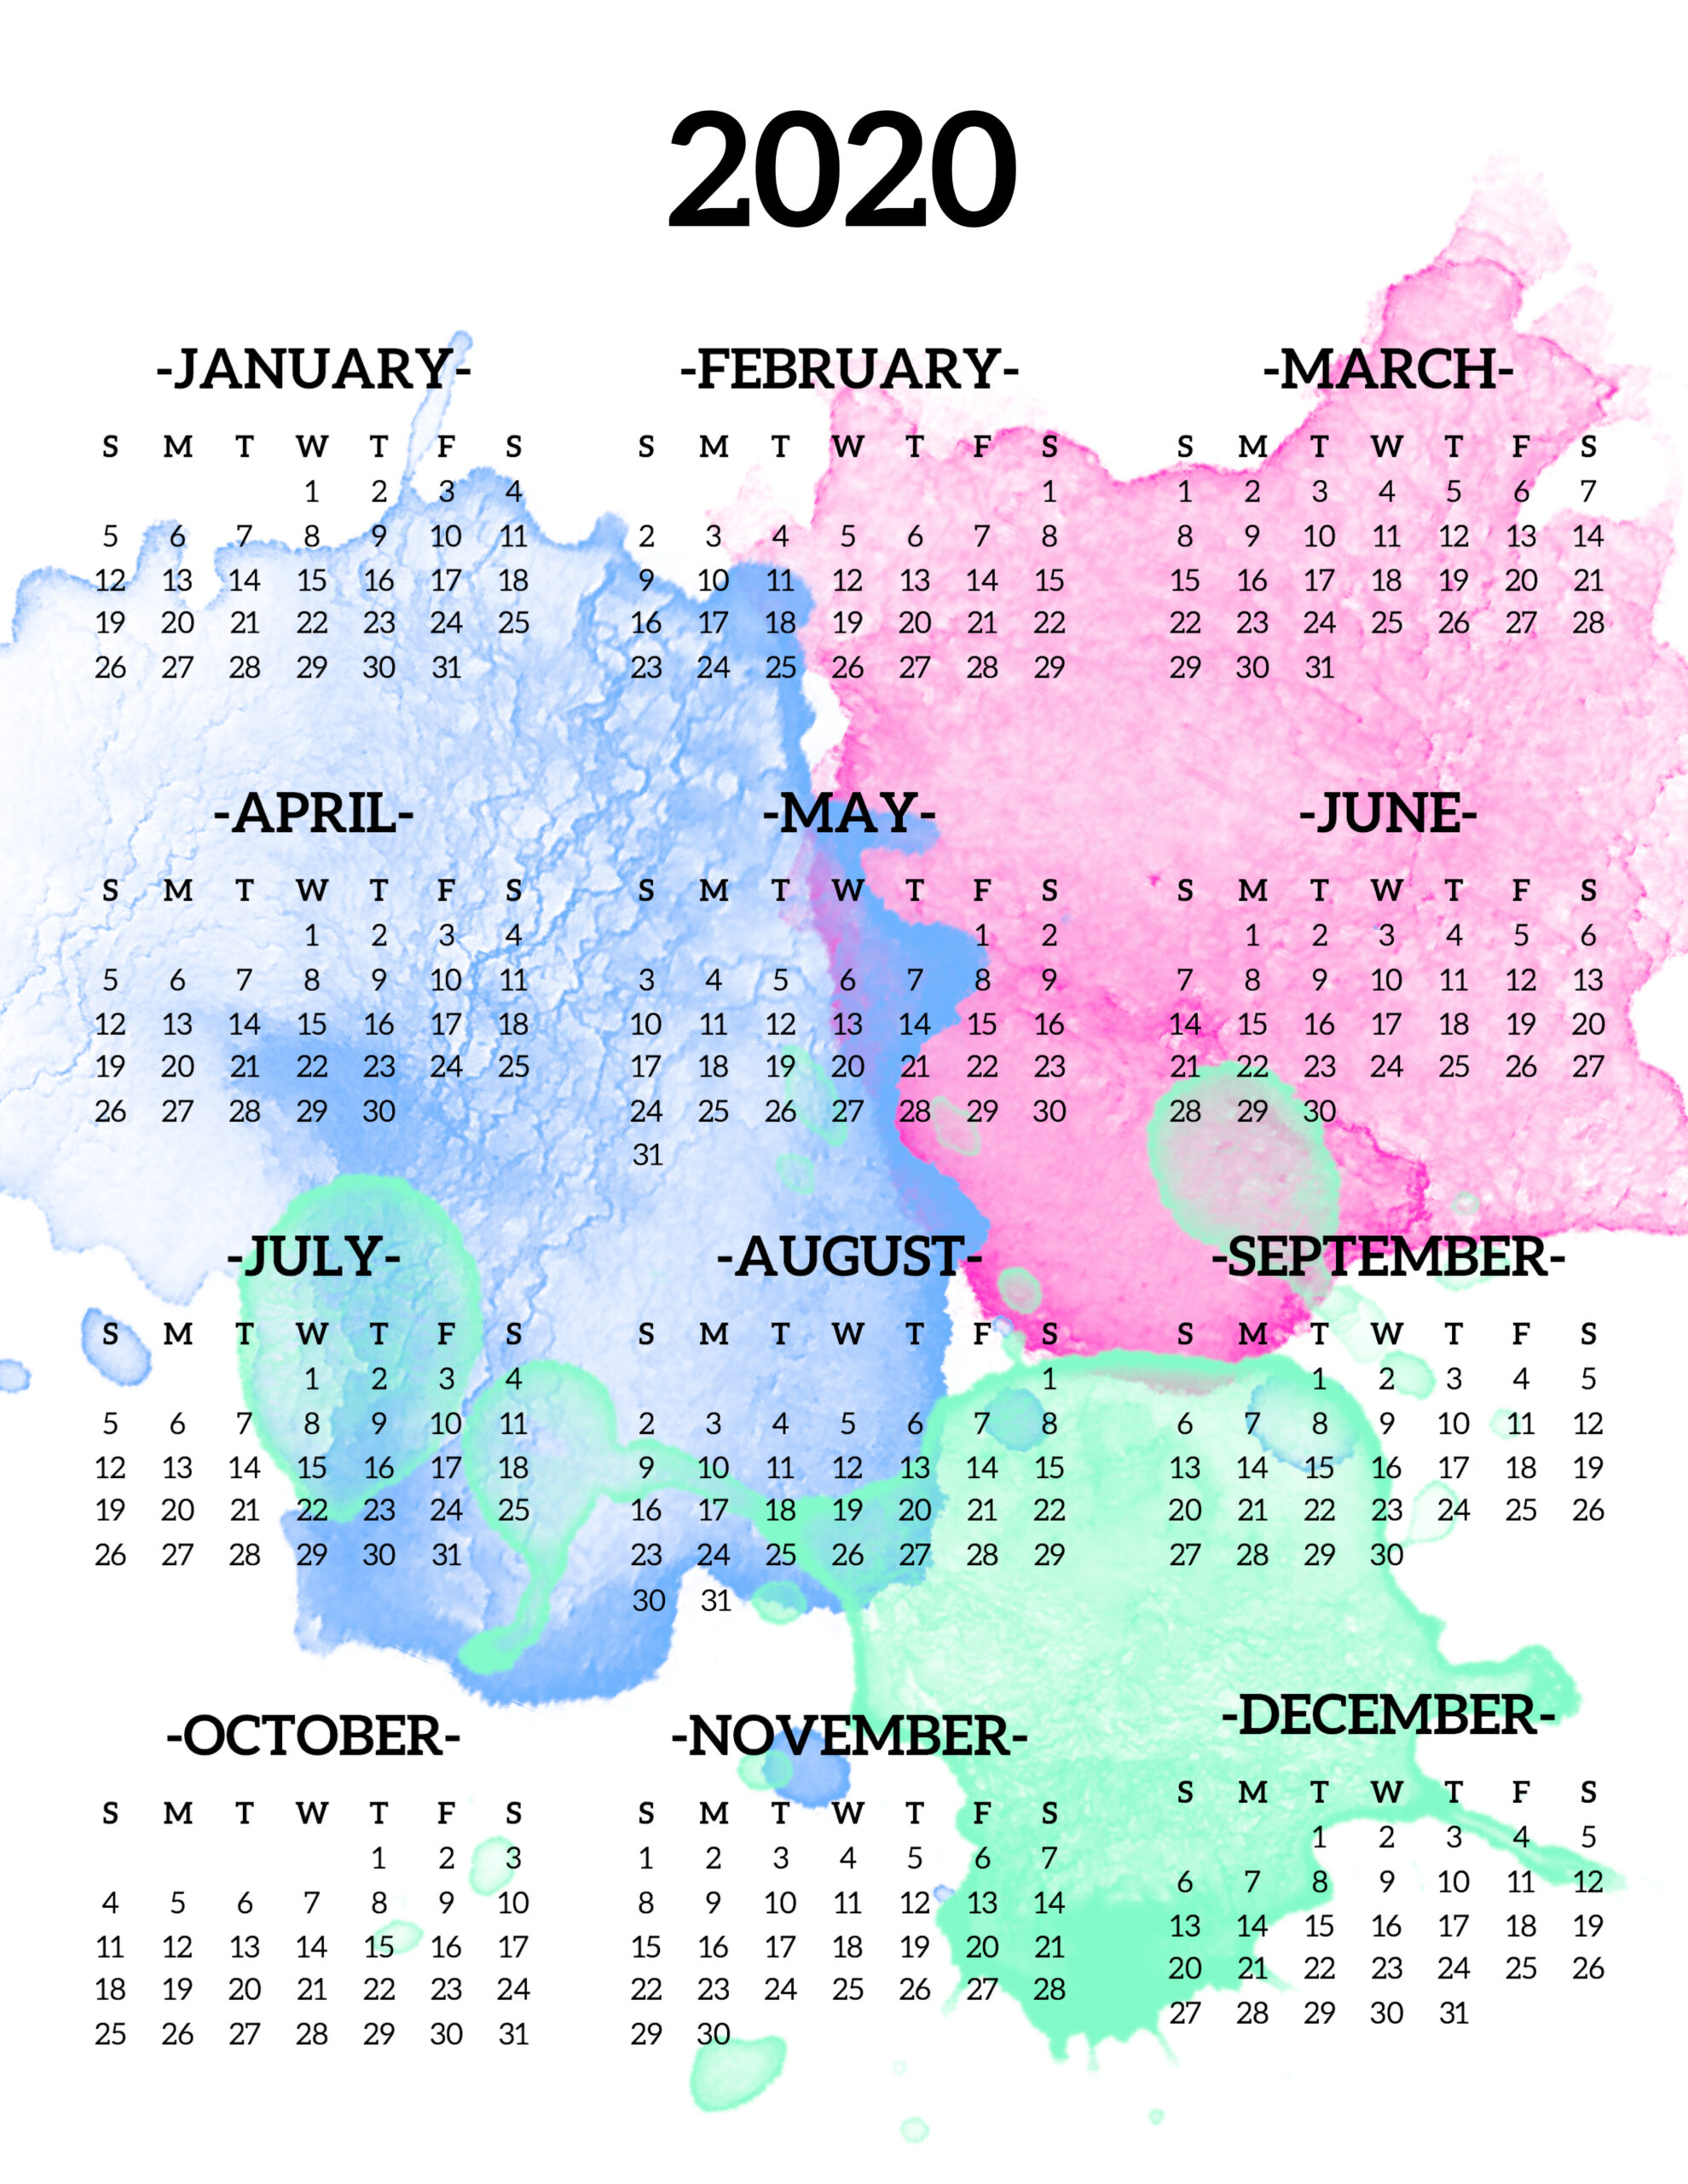 Calendar 2020 Printable One Page  Paper Trail Design intended for 2020 Year At A Glance Printable